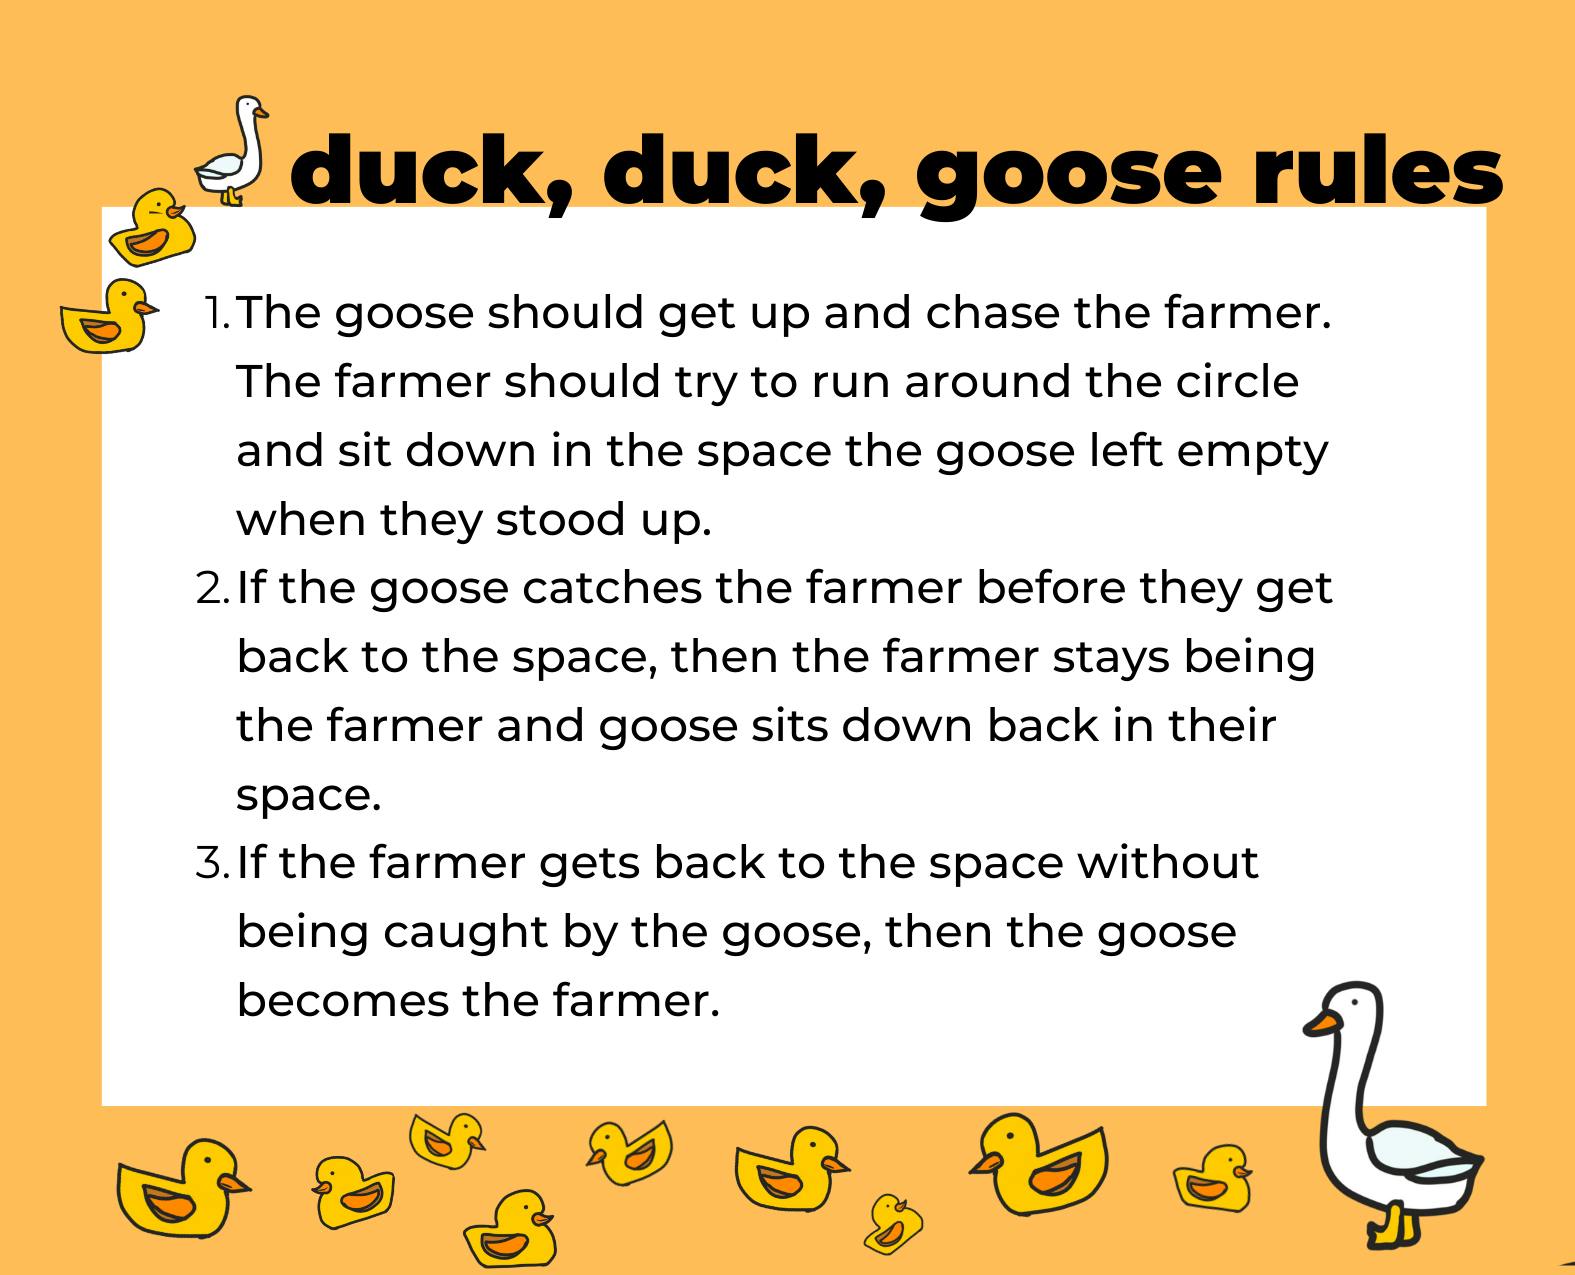 the_goose_should_get_up_and_chase_the_farmer._the_farmer_should_try_to_run_around_the_circle_and_sit_down_in_the_space_the_goose_left_empty_when_they_stood_up._if_the_goose_catches_the_farmer_befo.png